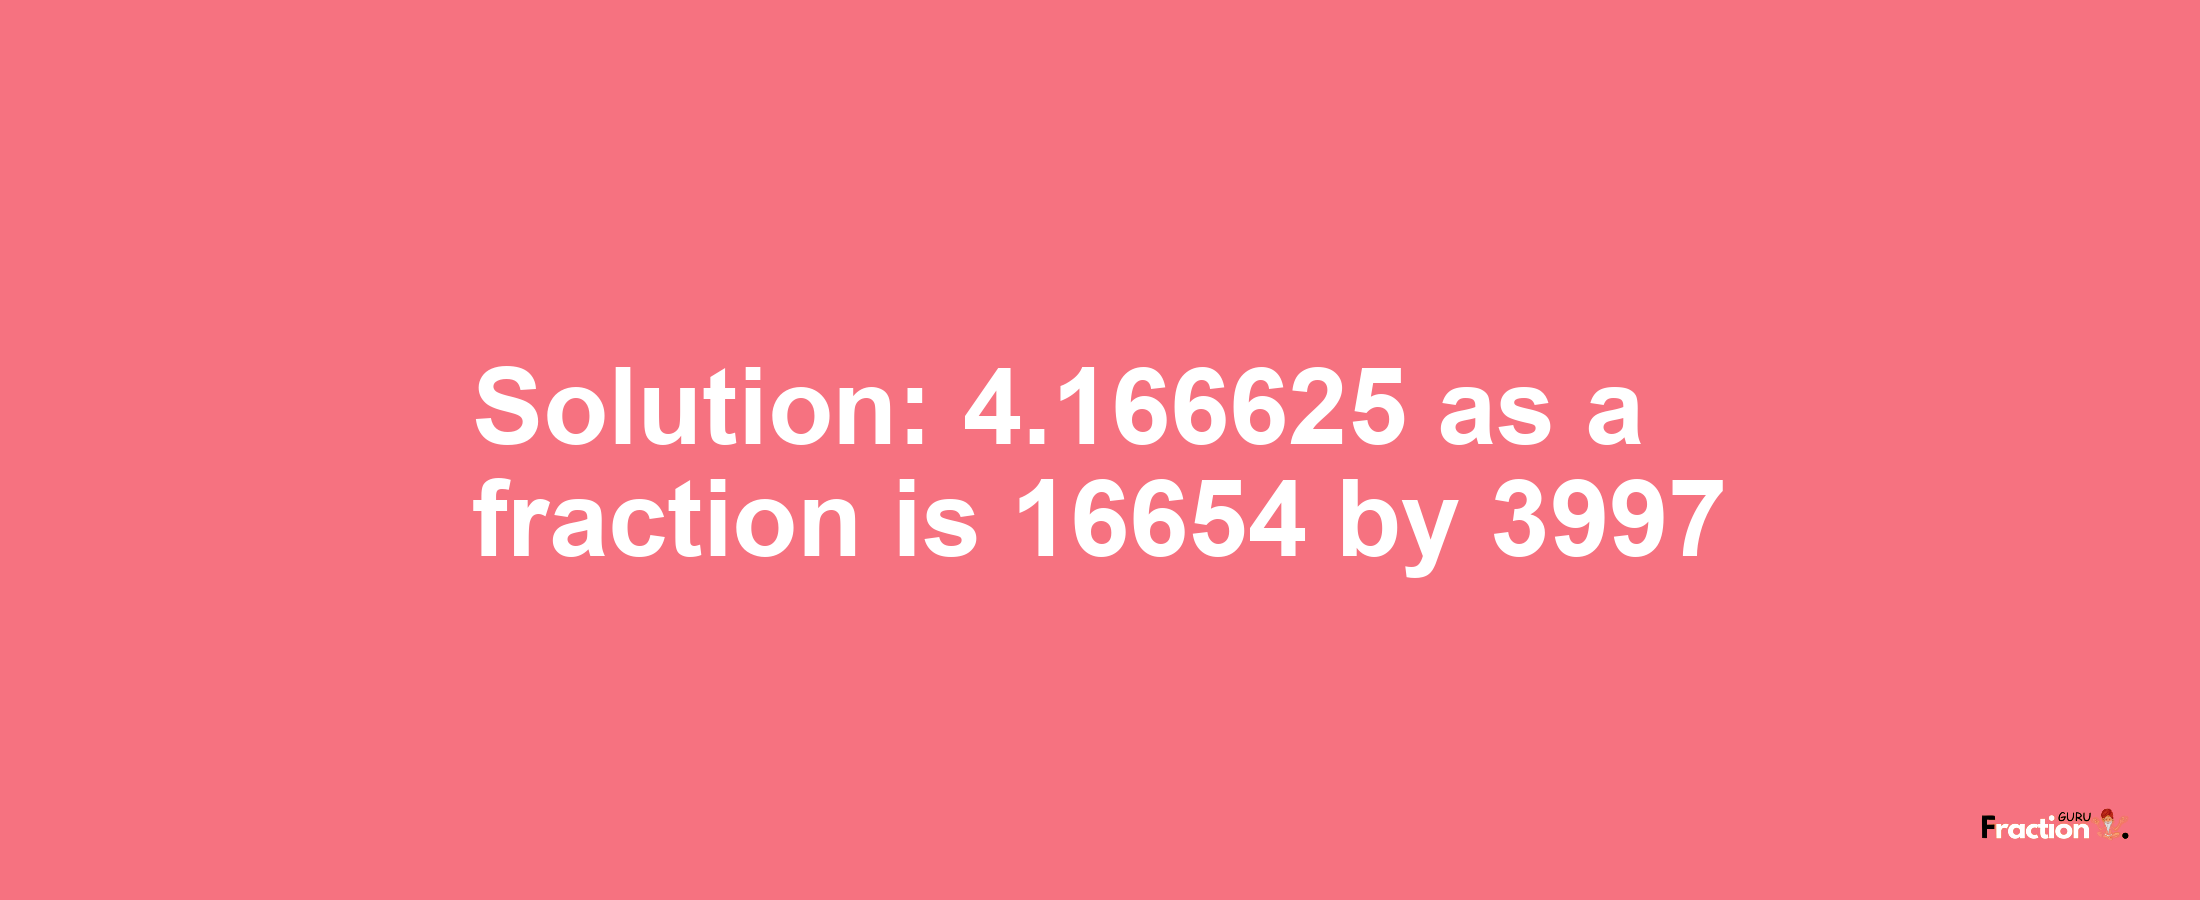 Solution:4.166625 as a fraction is 16654/3997